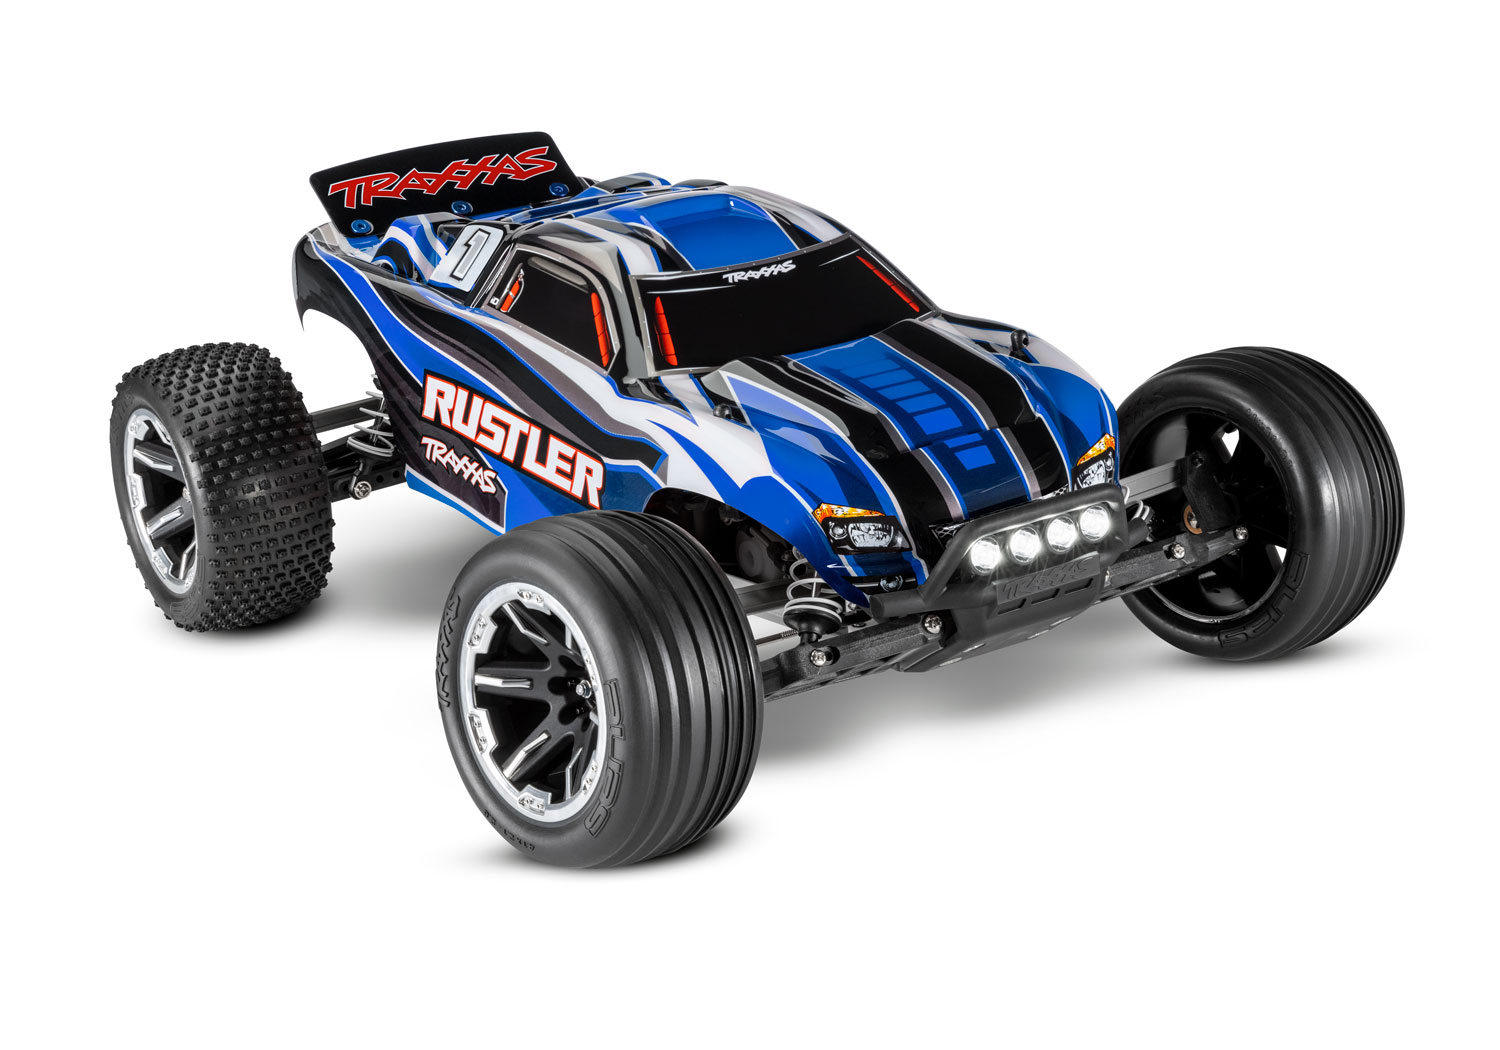 Traxxas Rustler XL5 2WD electro truggy RTR 2.4Ghz met LED verlichting inclusief Power Pack - Blauw